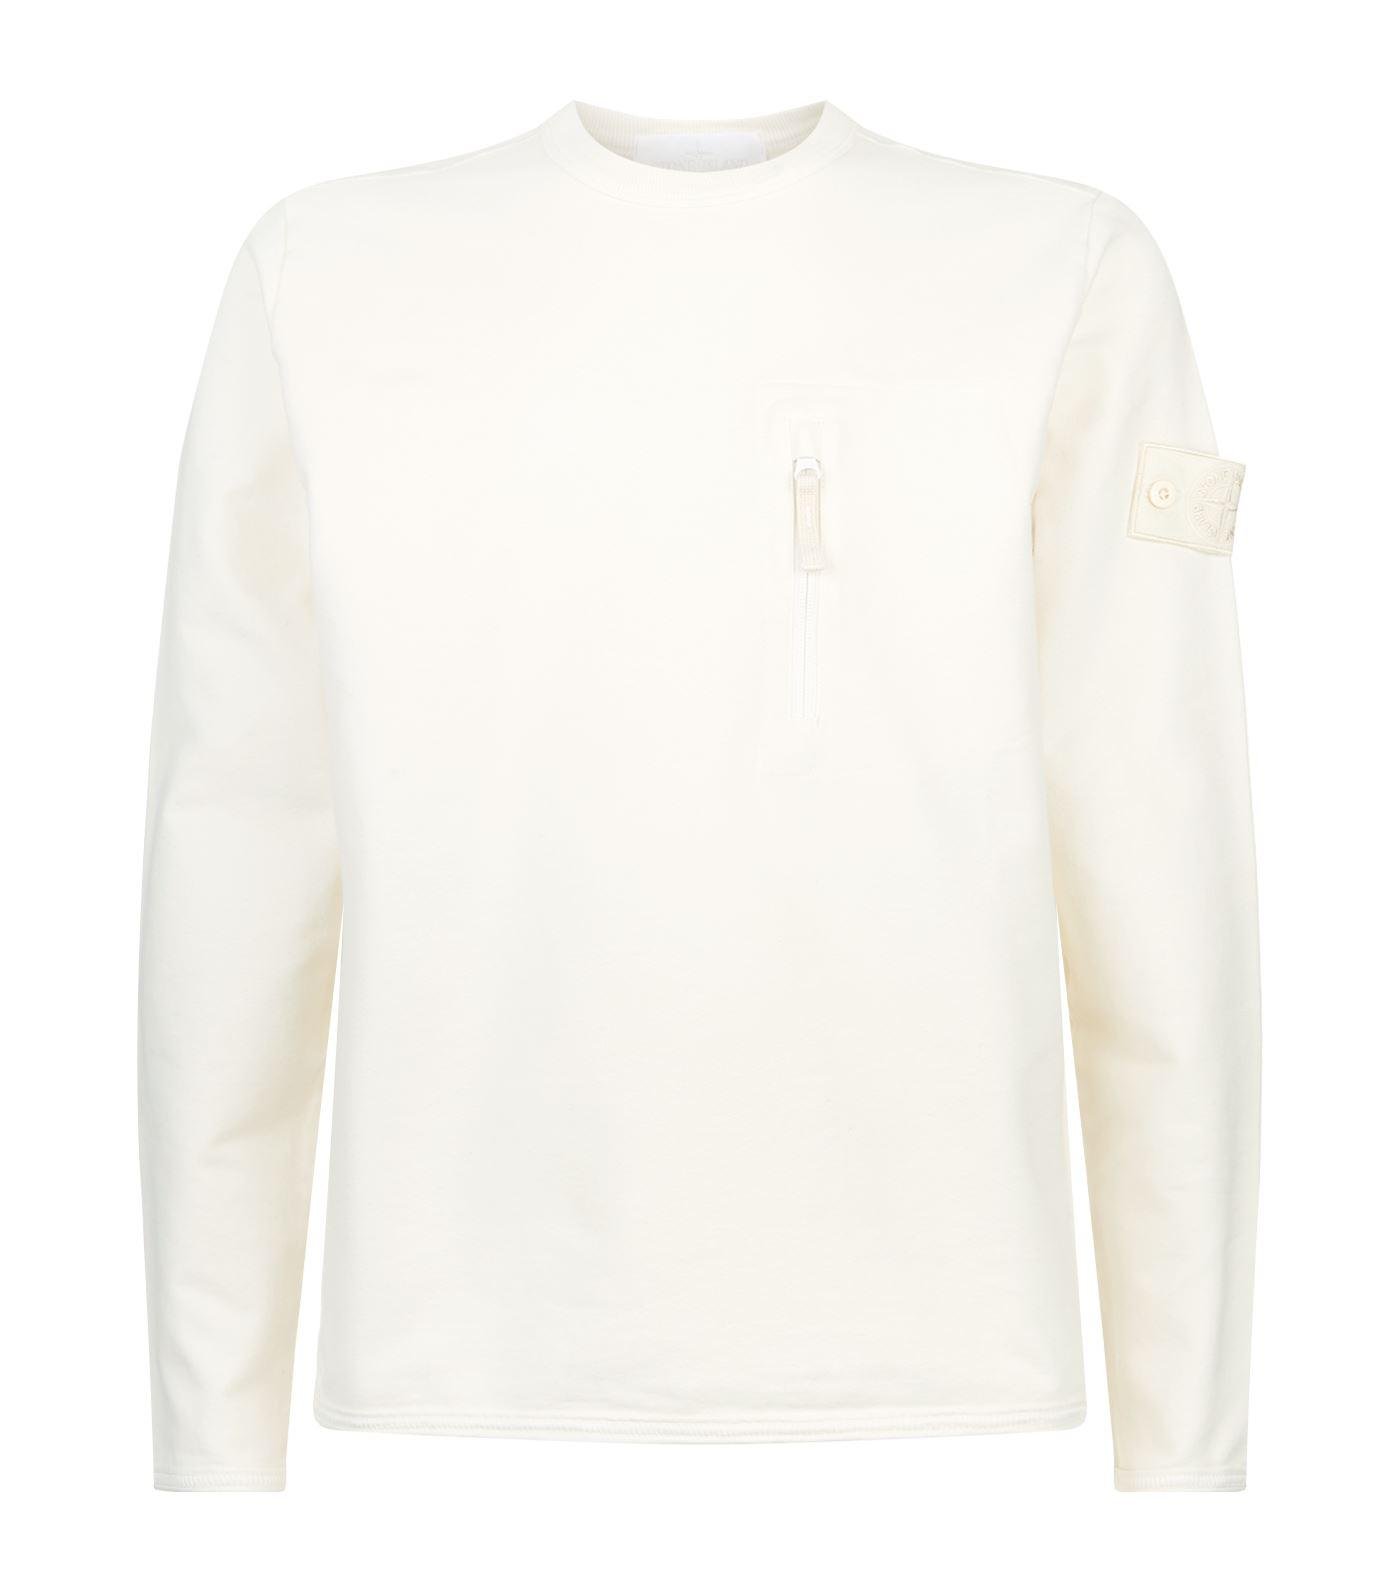 Stone Island Cotton Ghost Crew Neck Sweater in White for Men - Lyst